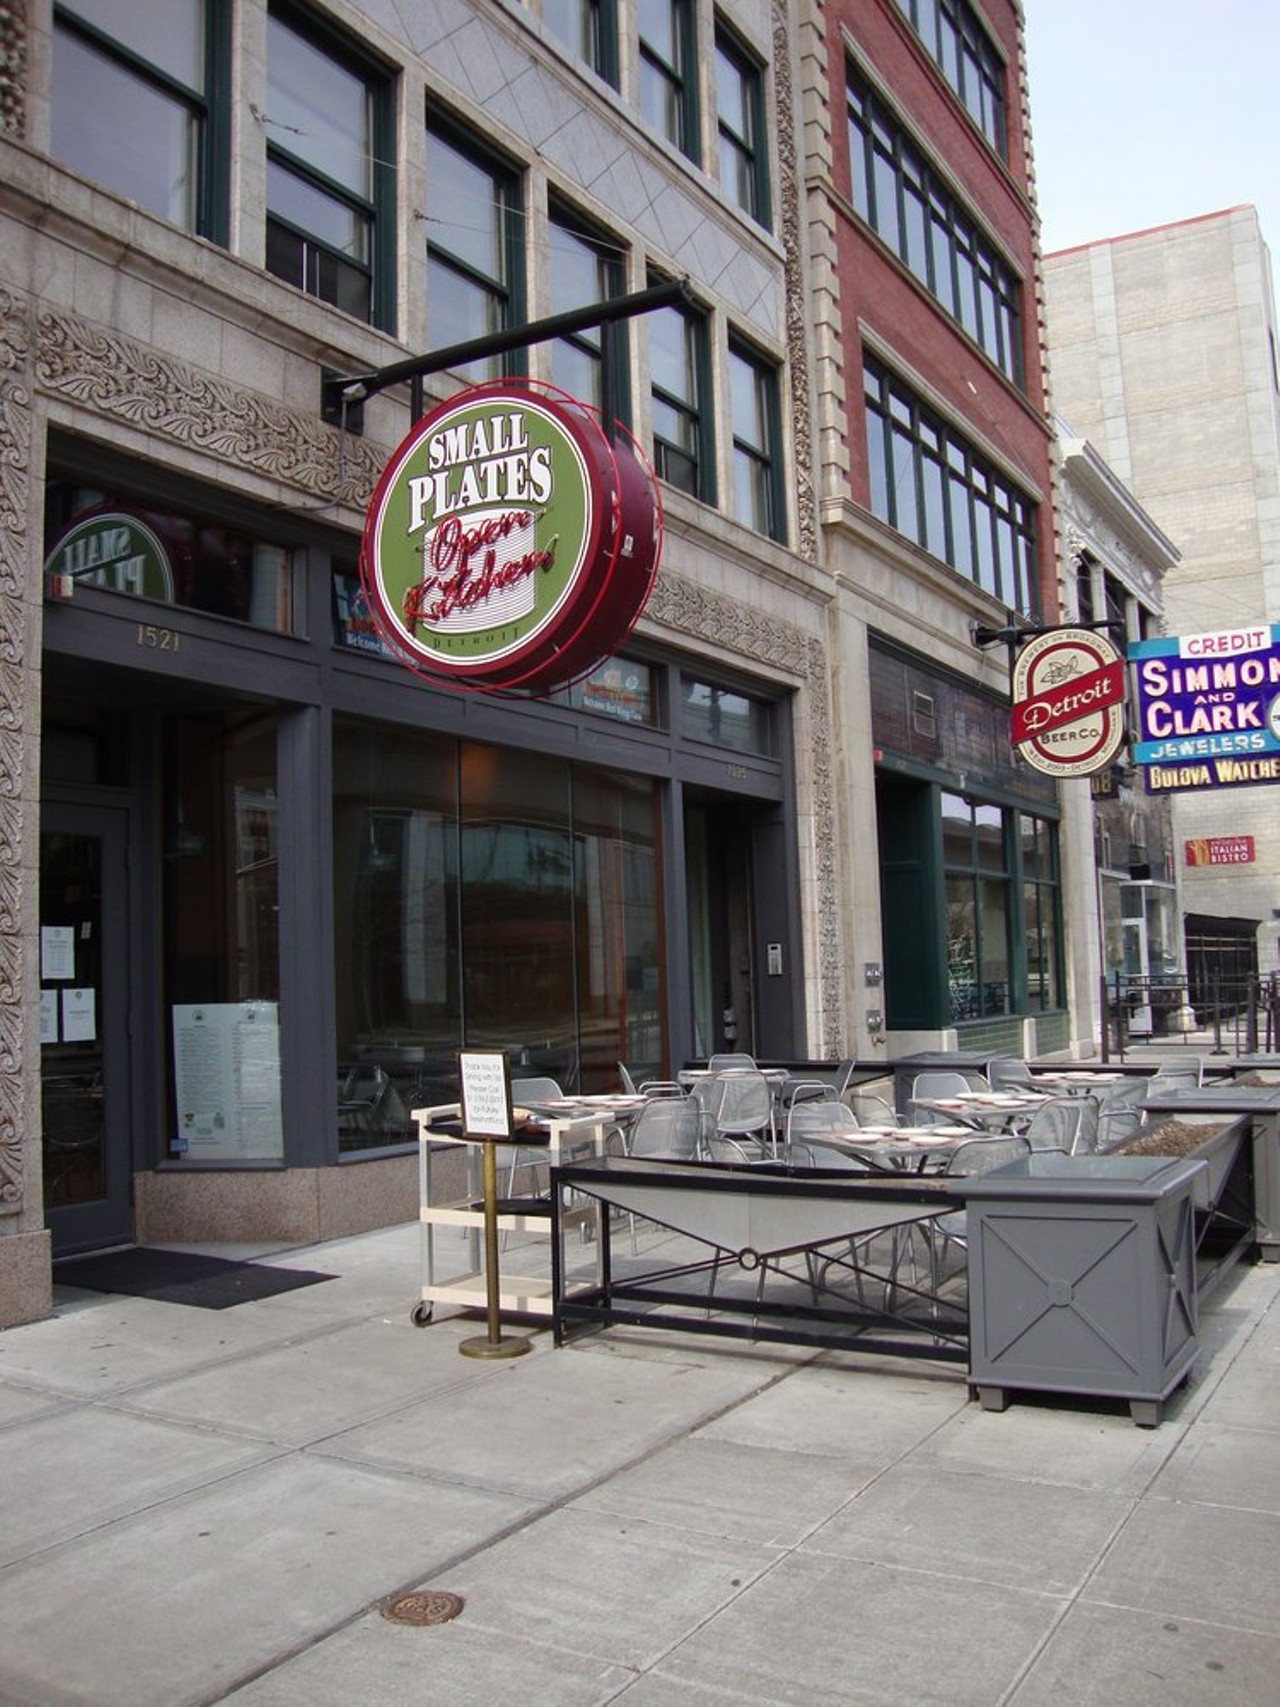 Small Plates1521 Broadway, Detroit; (313) 963-0702
This downtown dining destination offers the palette a selection of cuisine as diverse as the city itself -- and a simple outdoor seating area that's perfect for when you're out and about. 
(Photo credit: Amy D. on Yelp)